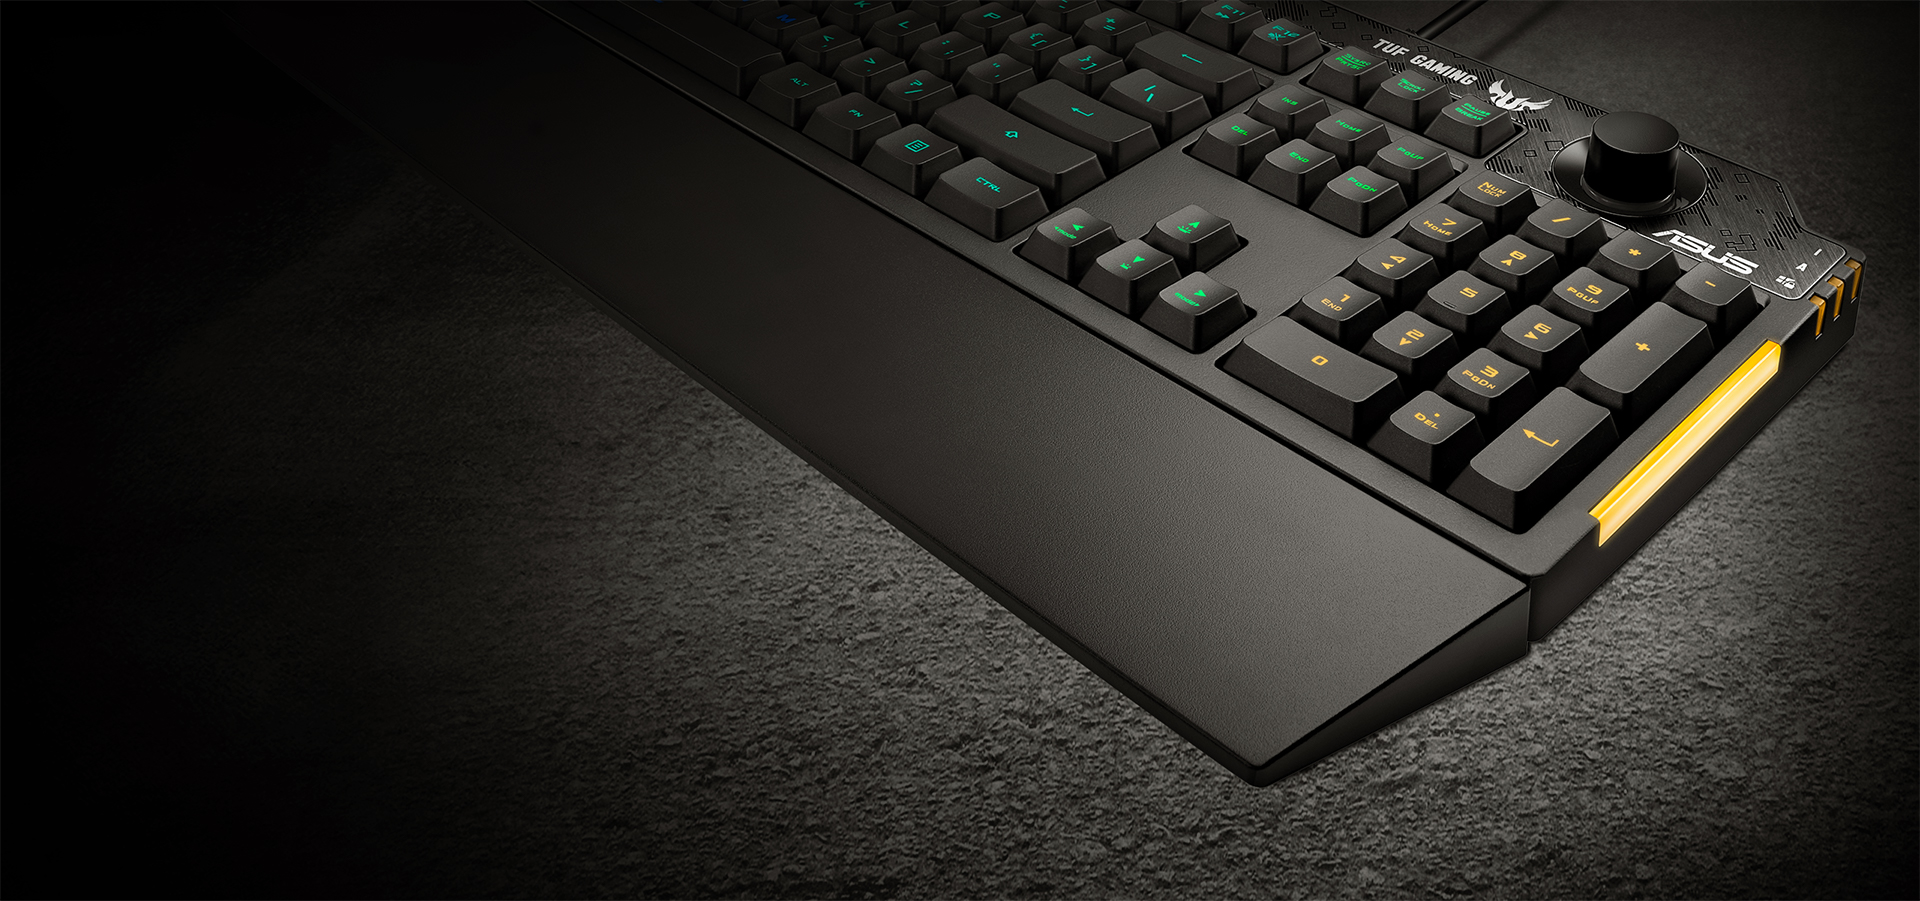 ASUS TUF Gaming K1 keyboard offers keystrokes with a cushioned, tactile feel